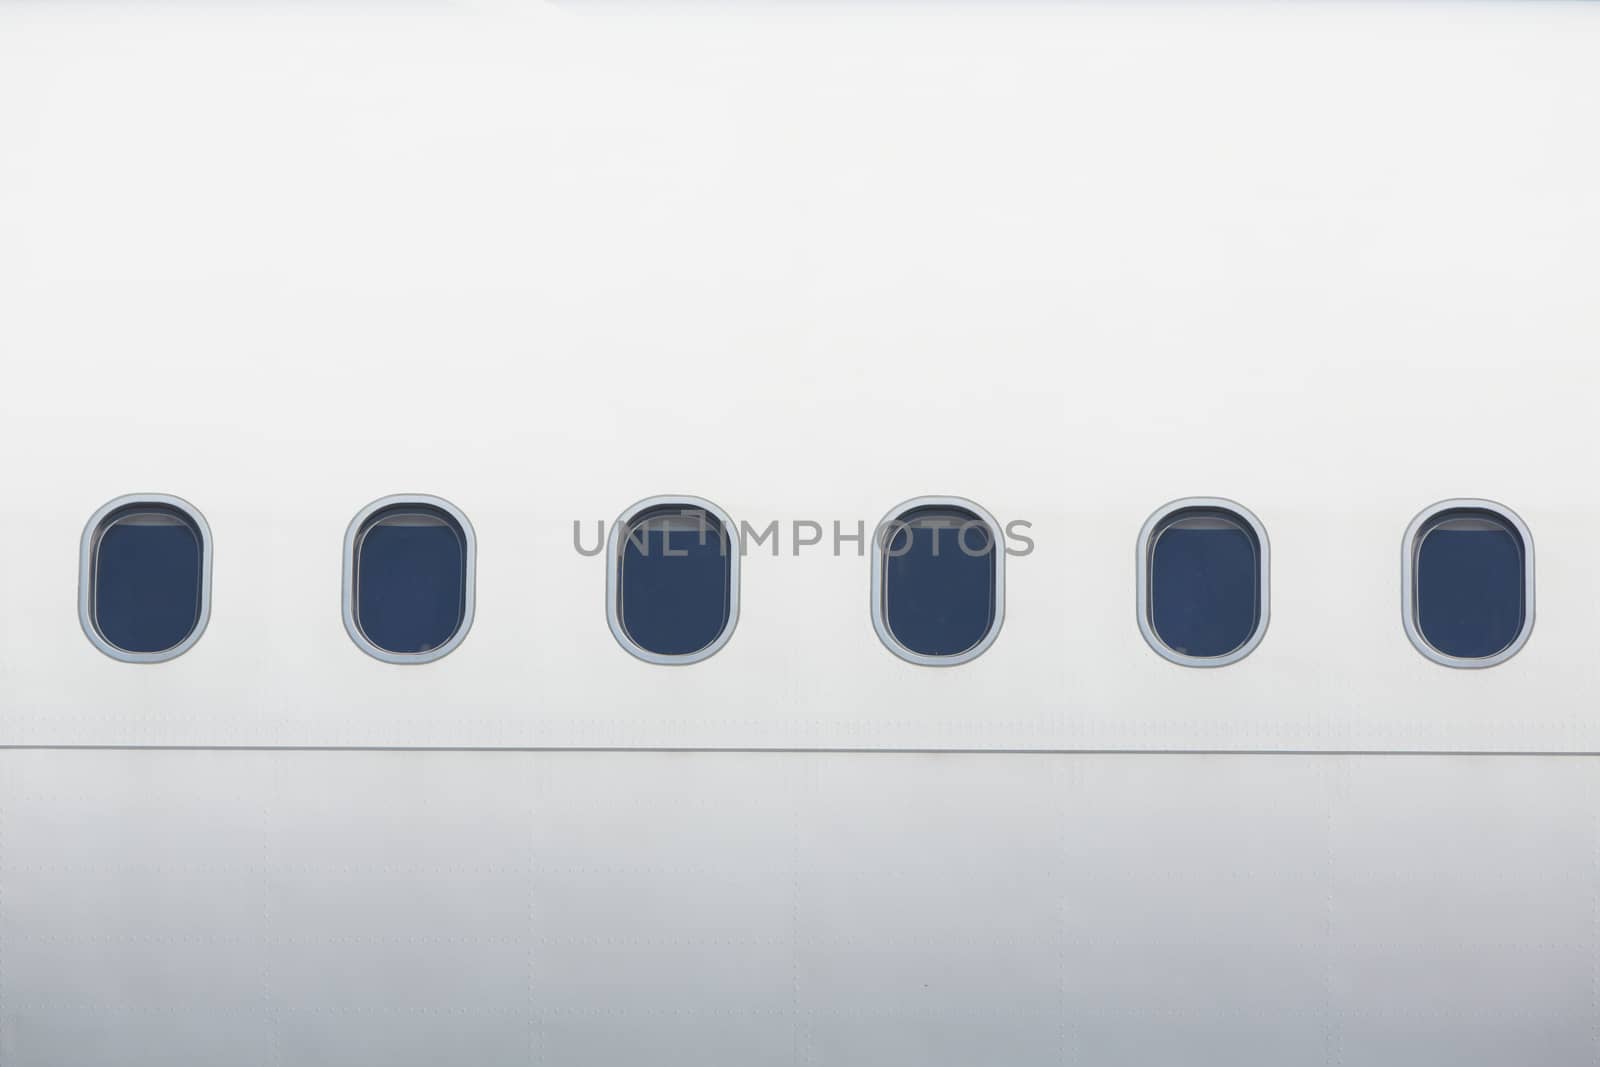 Windows of the white airplane - copy space